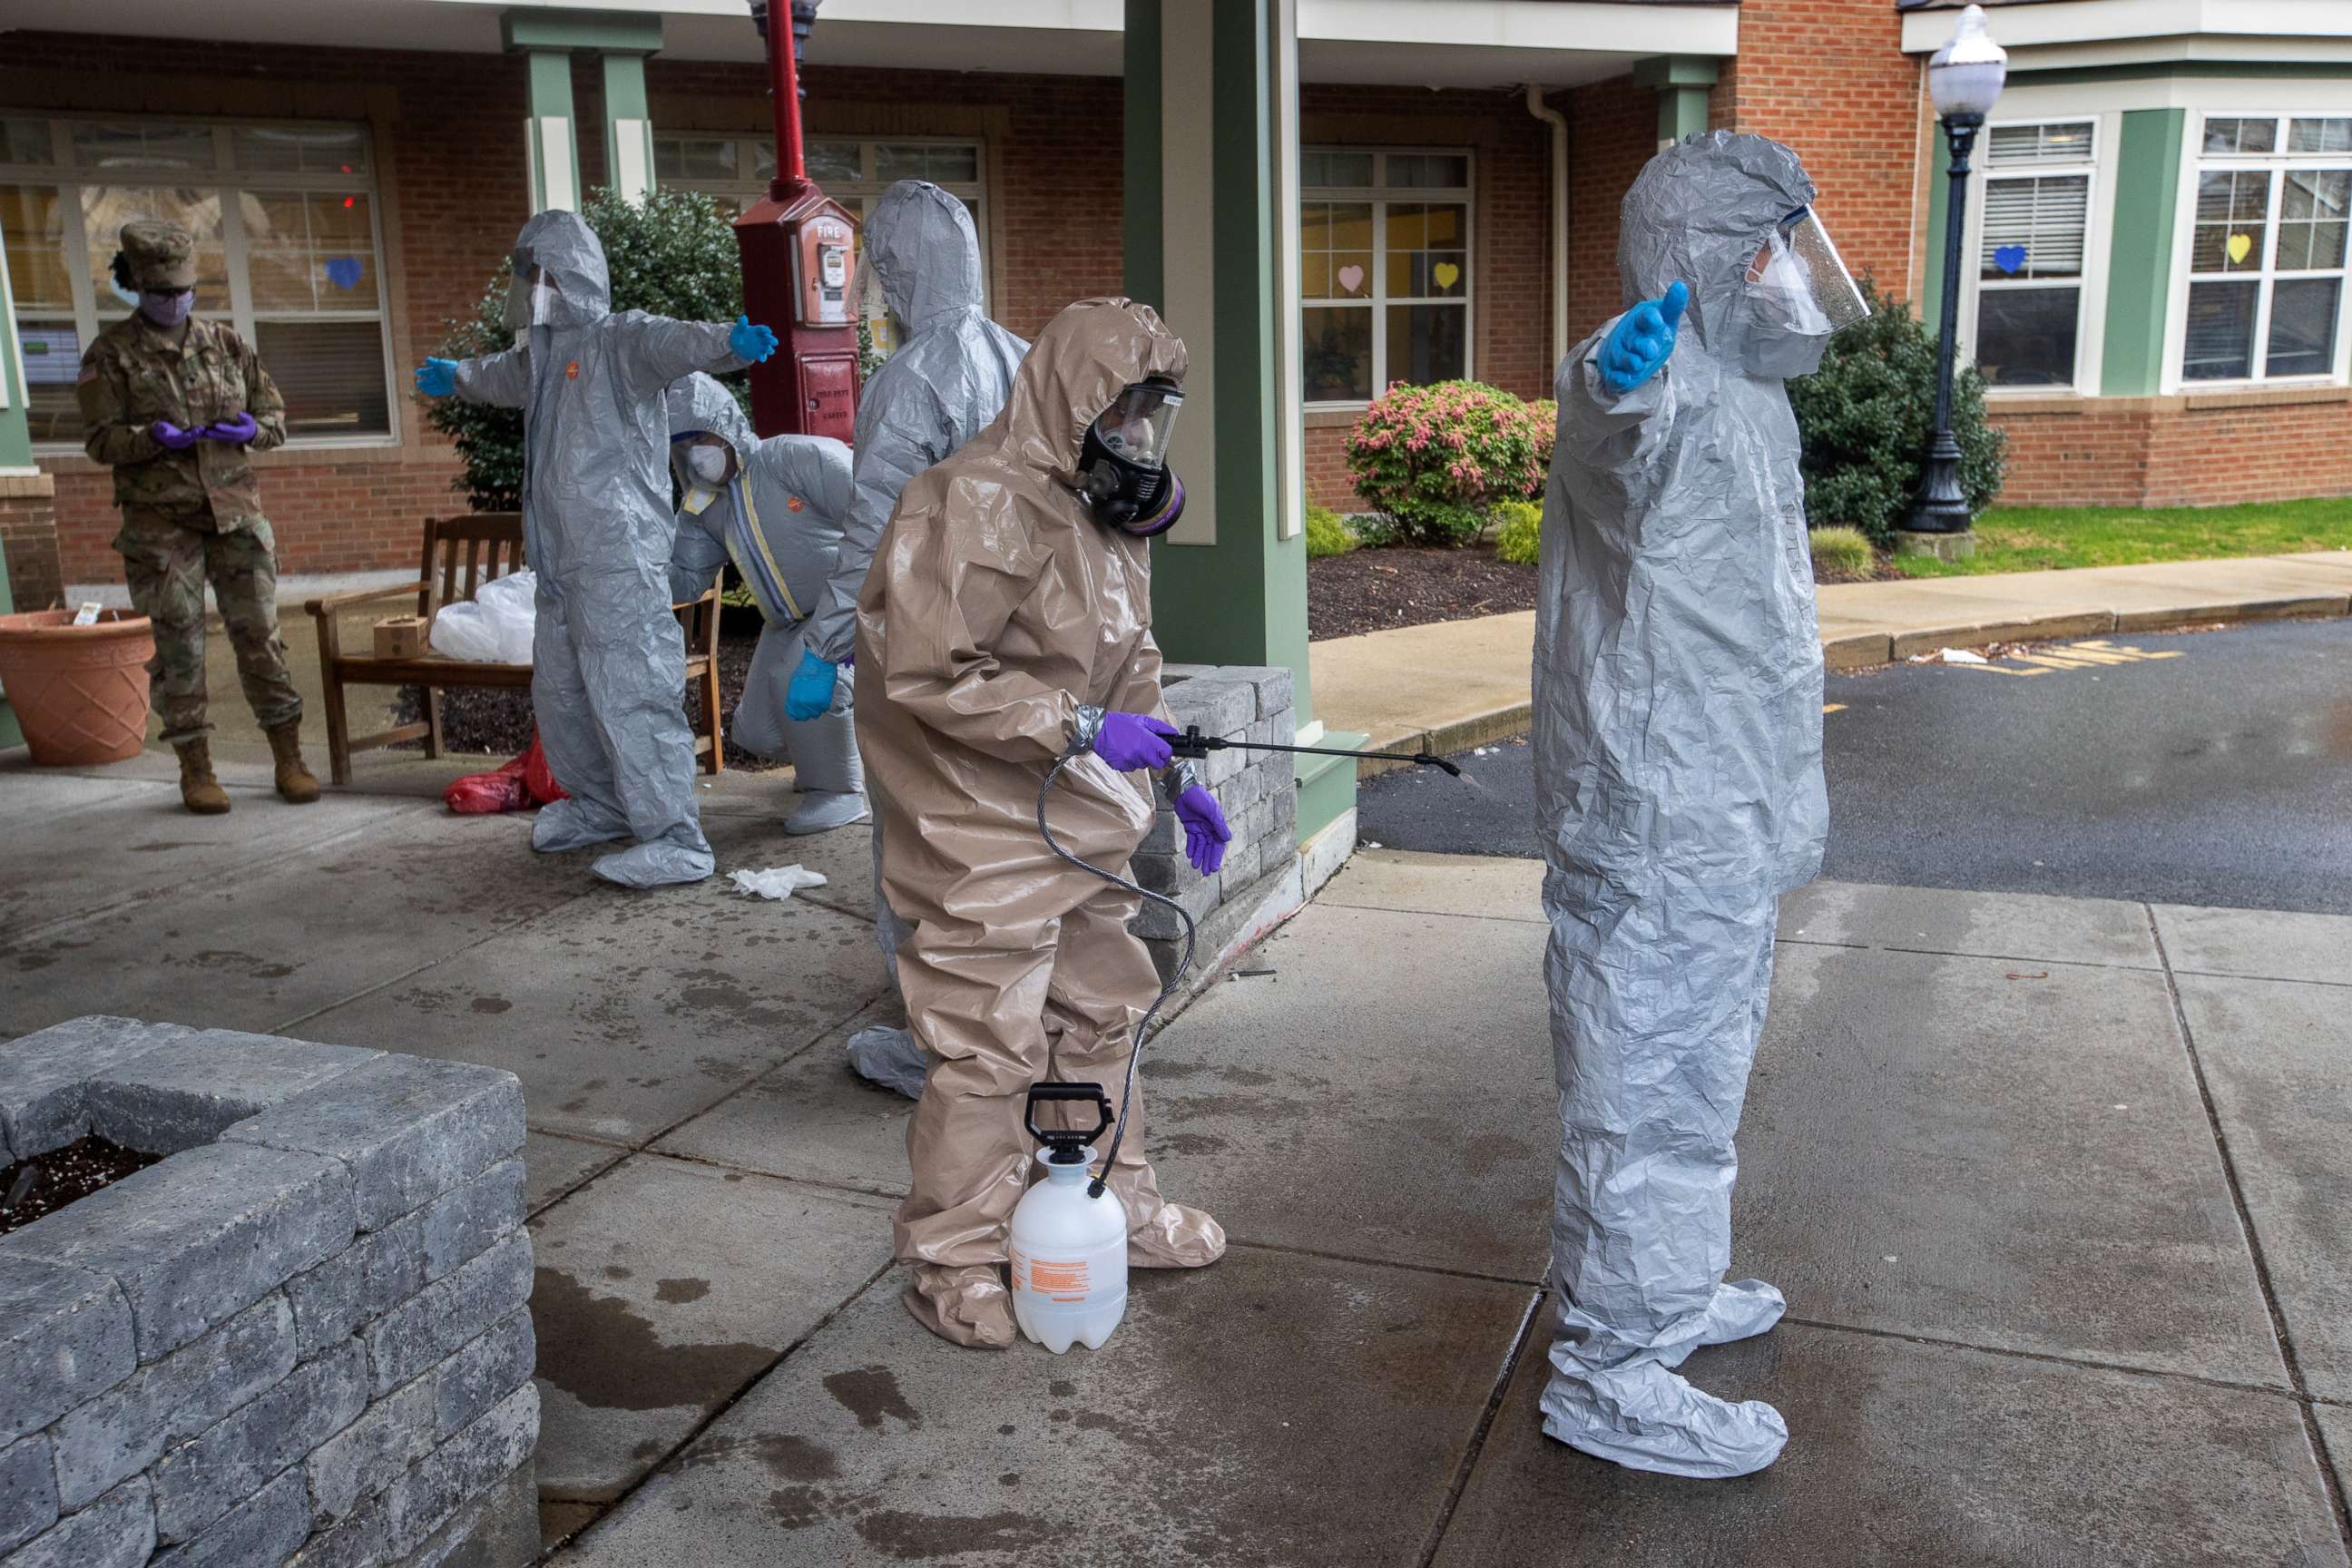 PHOTO: Members of the Massachusetts National Guard are sprayed down before removing their hazmat suits after leaving Alliance Health at Marina Bay in Quincy, MA on April 9, 2020. They were deployed to Quincy to assist nursing homes with COVID-19 testing.